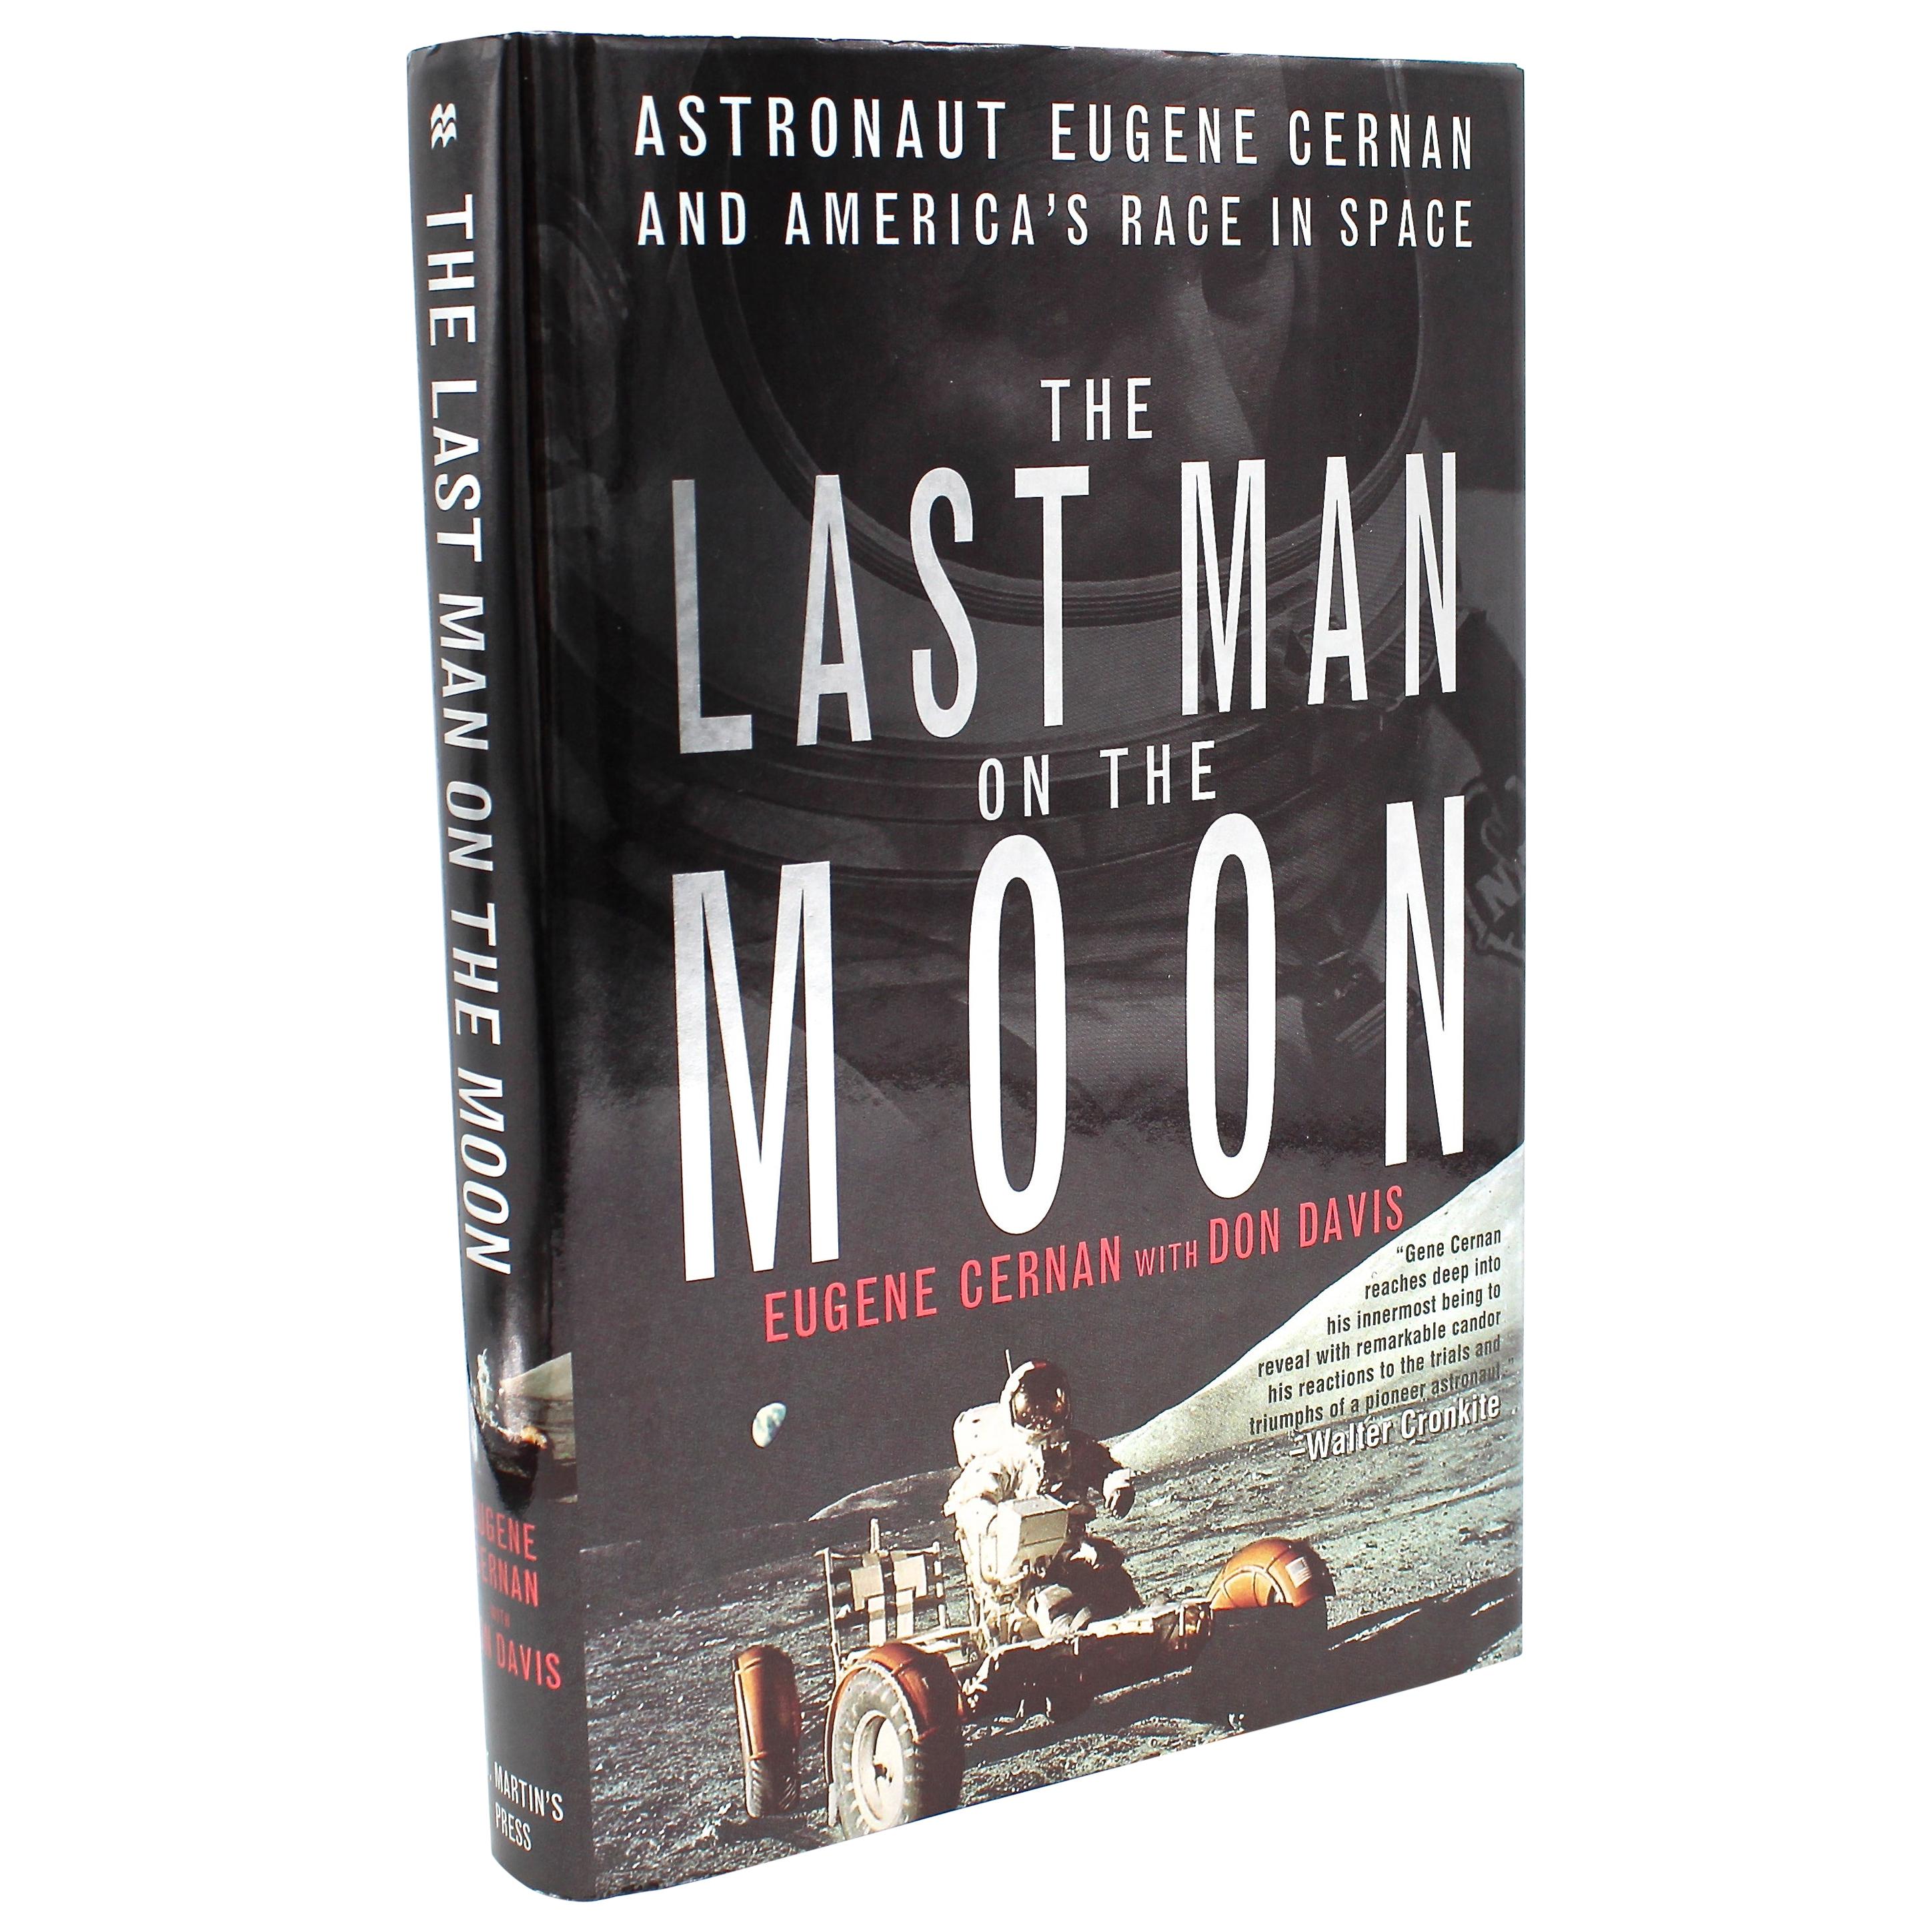 "Last Man on the Moon" by Eugene Cernan, First Edition, Signed and Inscribed